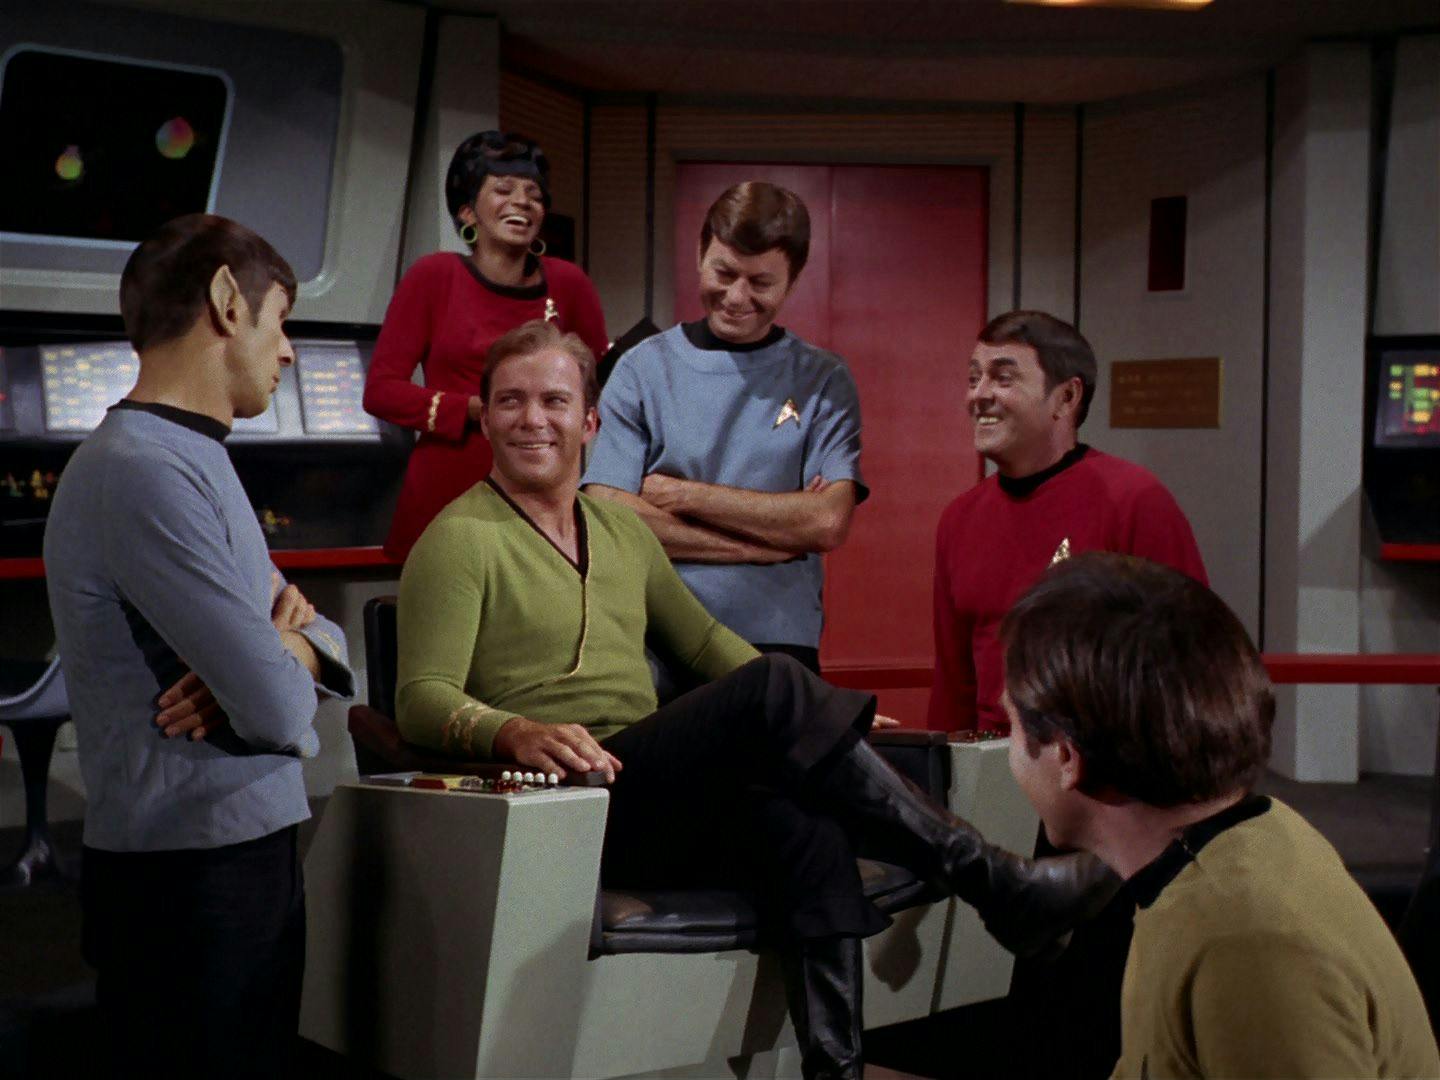 The Enterprise crew surround Kirk in the captain's chair in smiles and good spirits on Star Trek: The Original Series